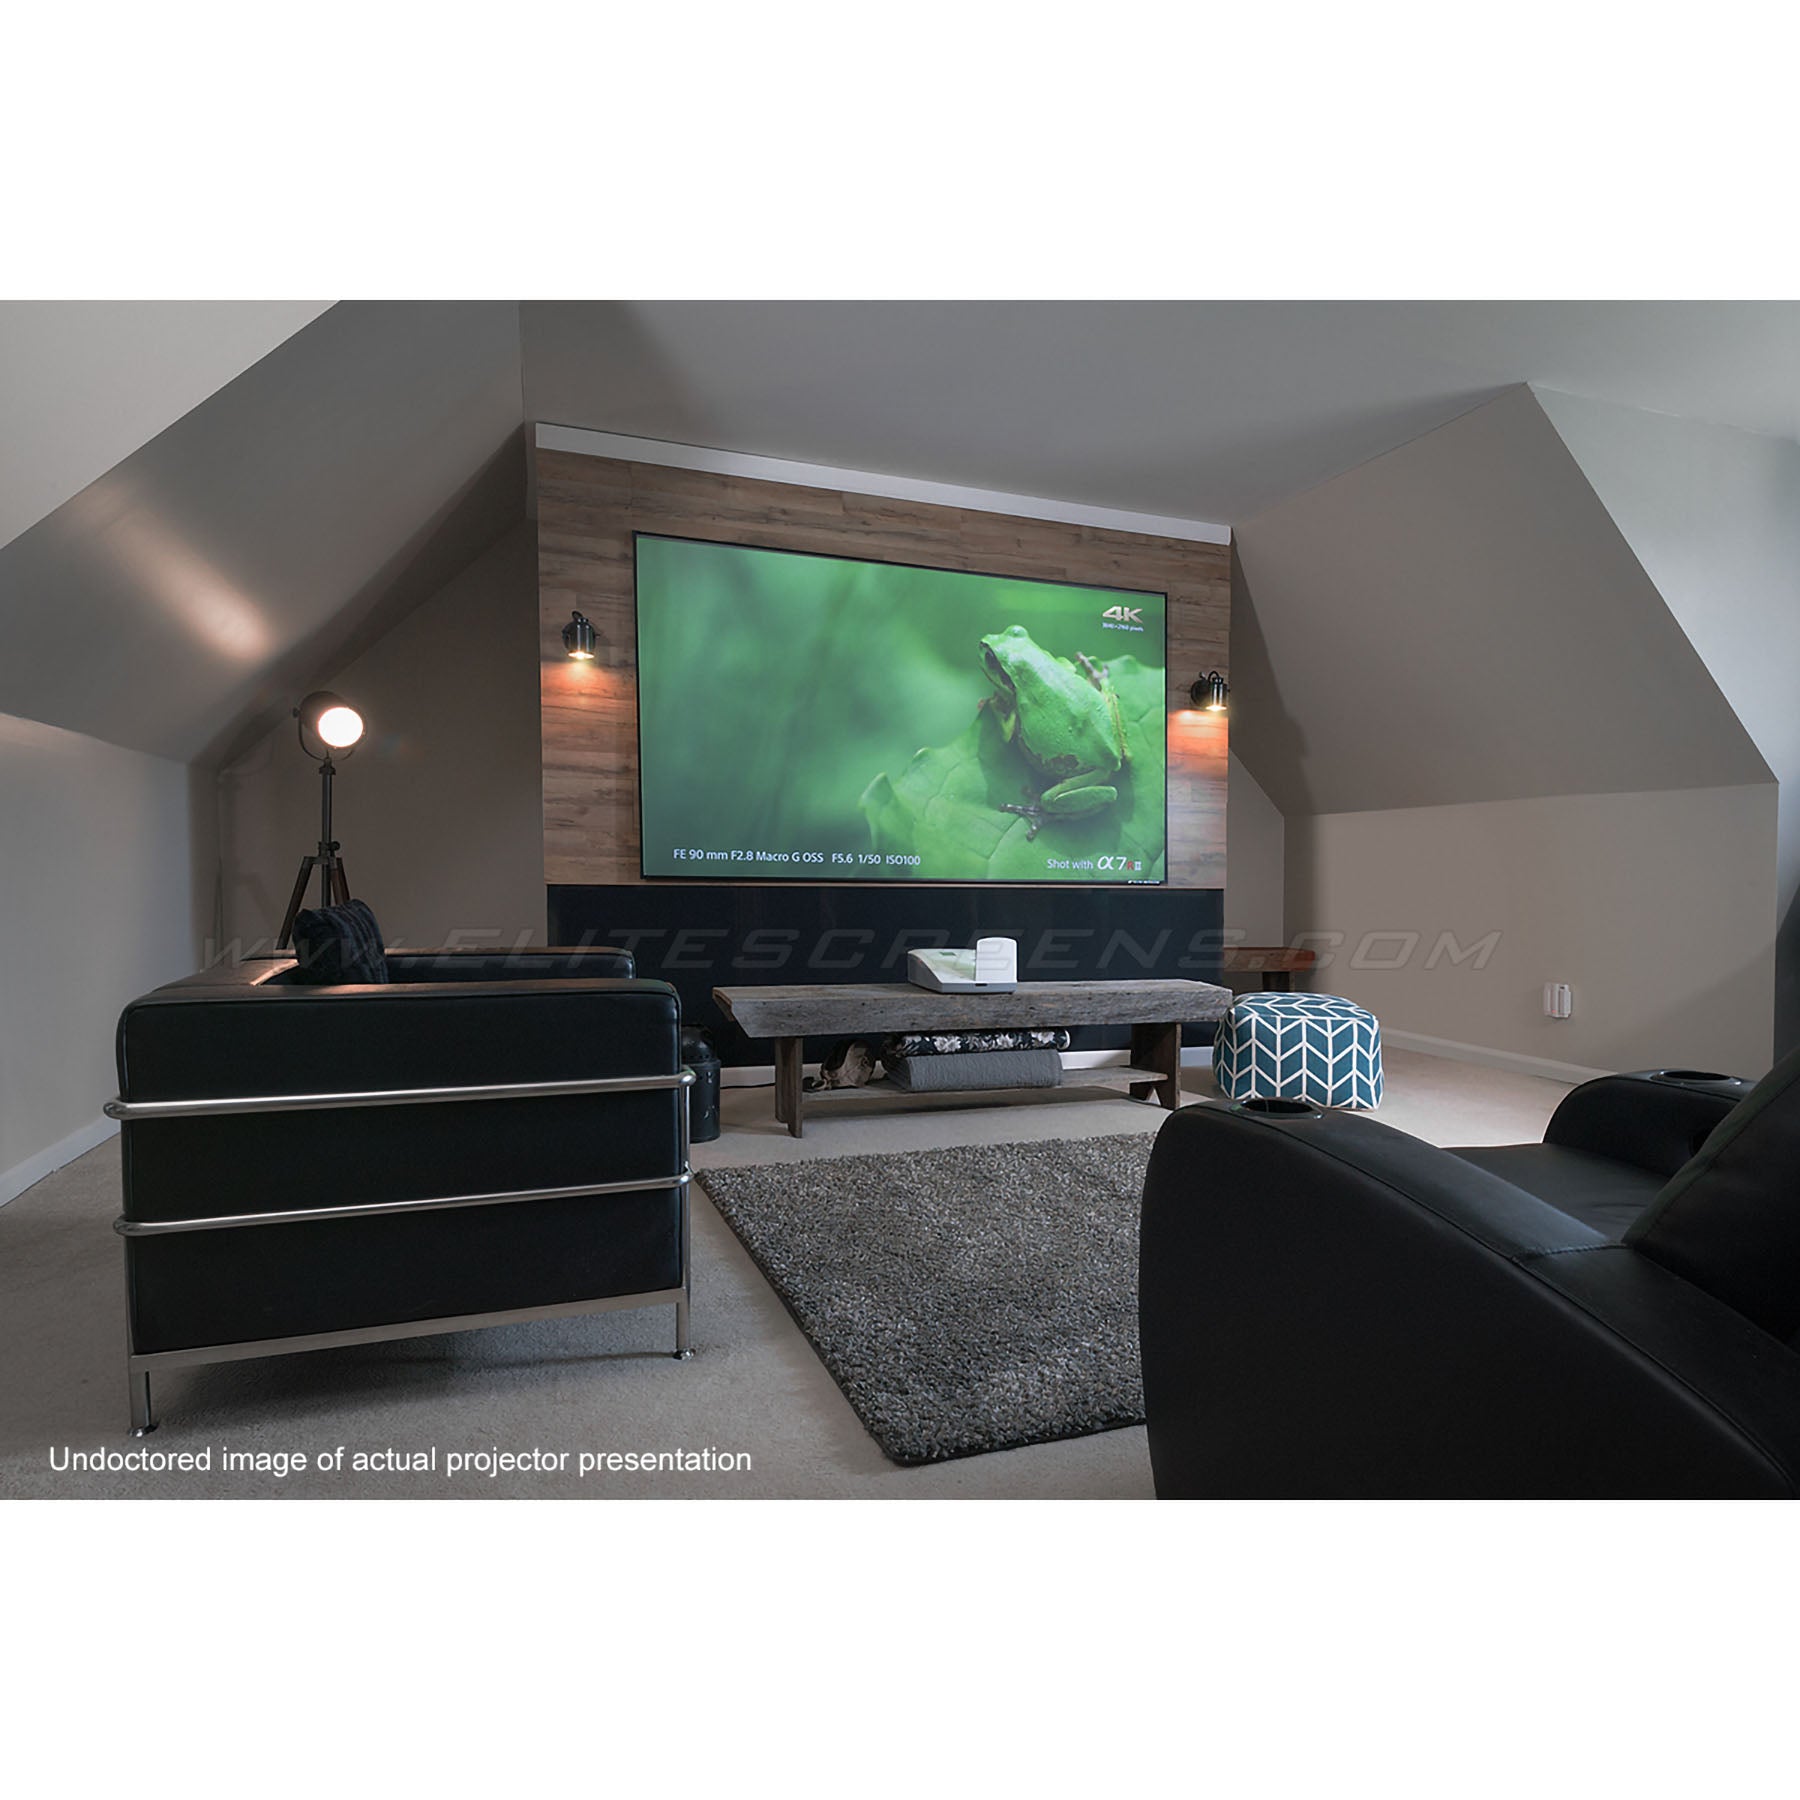 Elite Screens AR100H-CLR Aeon CLR 100" 16:9 4K for Ultra Short Throw Projectors with Ceiling Light Rejecting